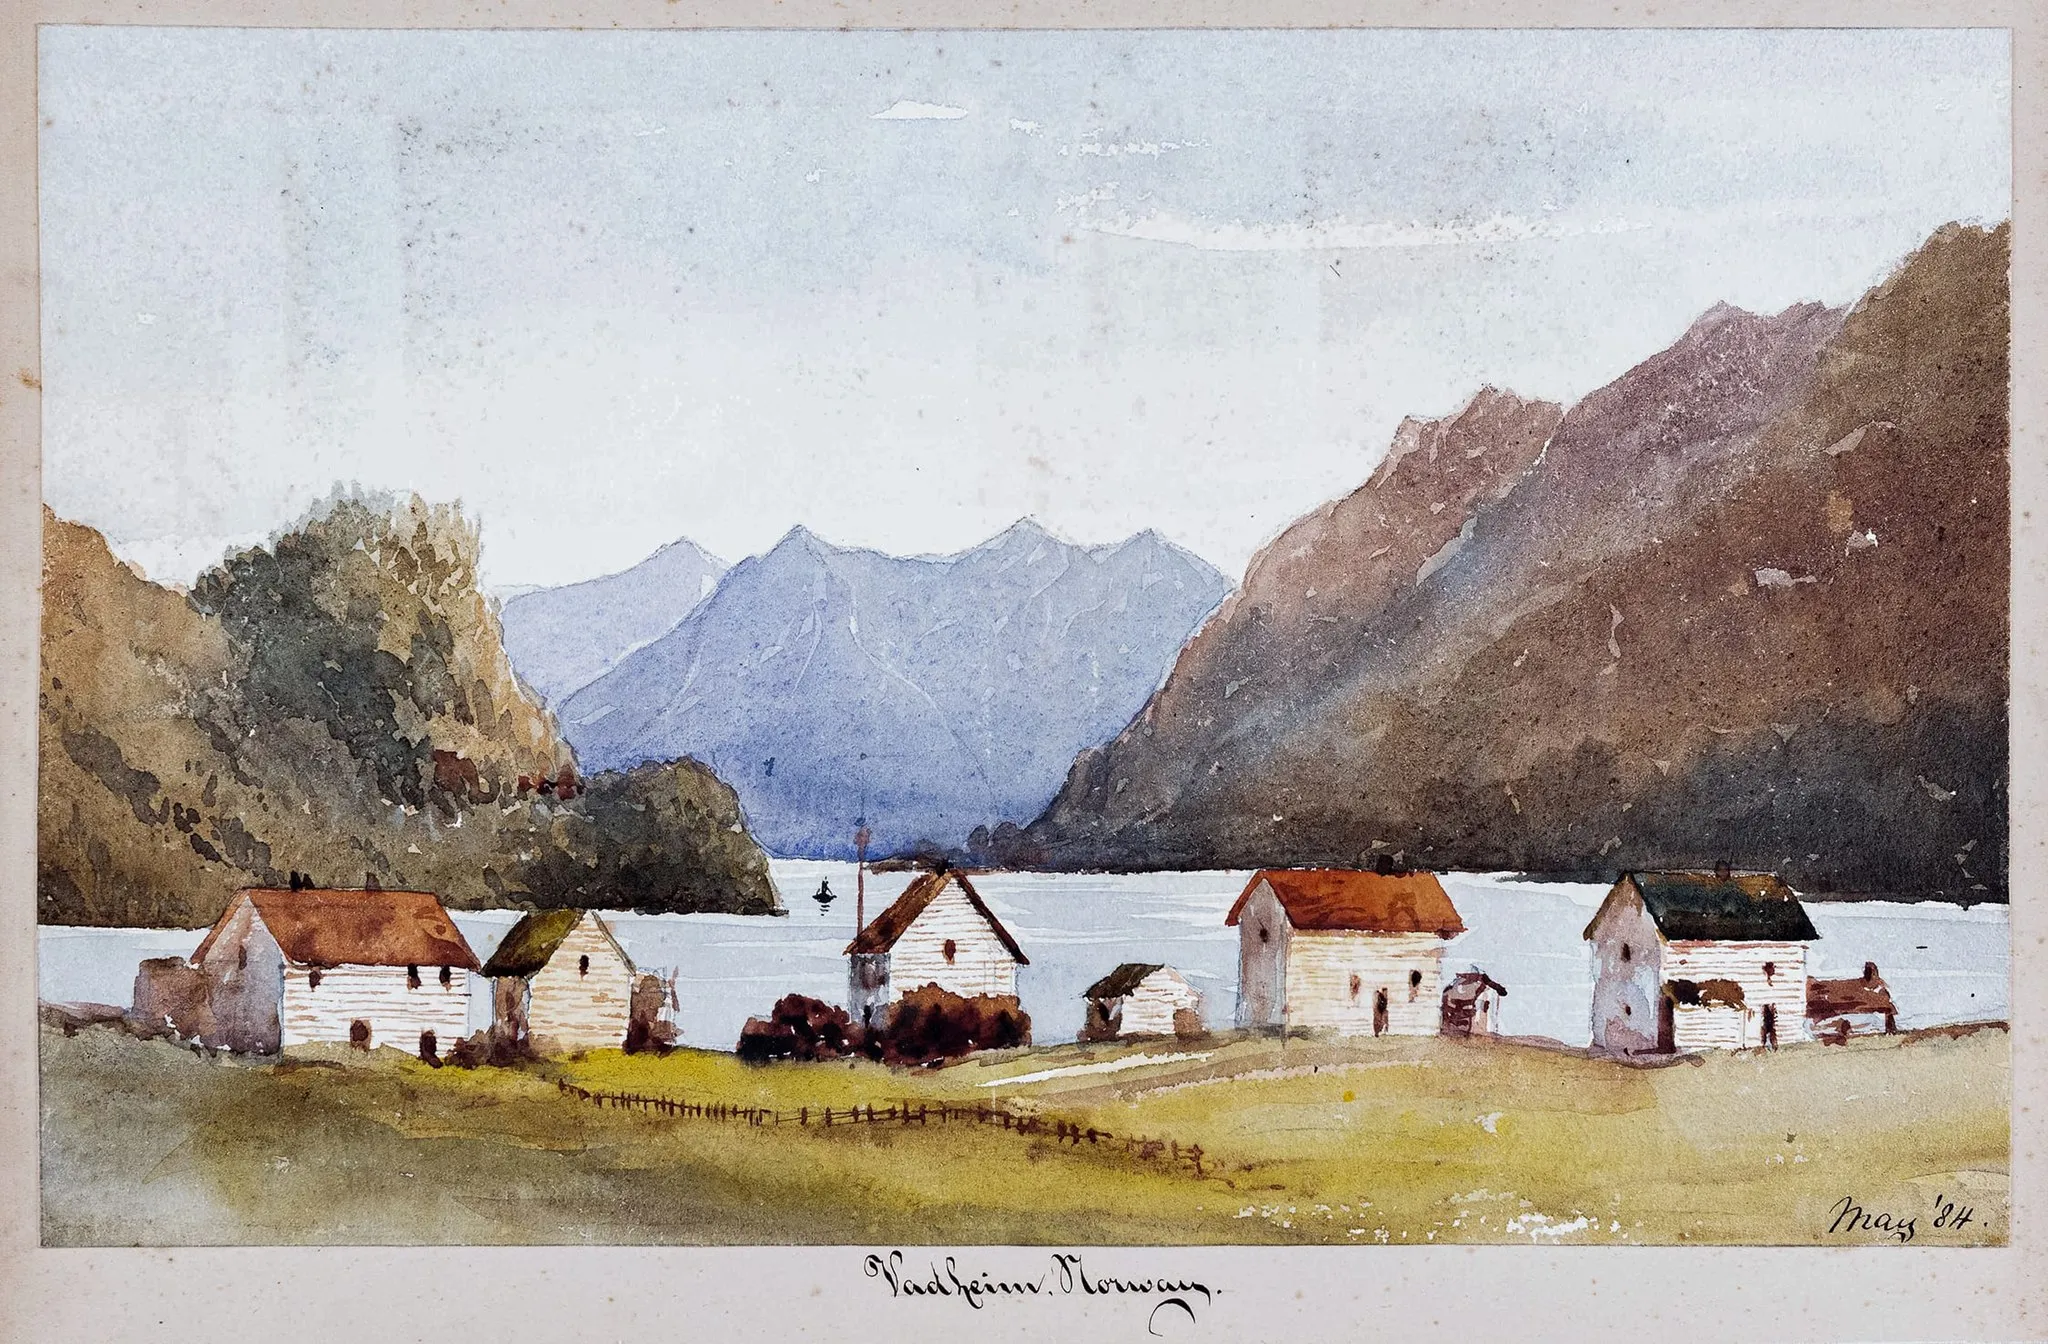 Photo showing: From an album offered for sale by Abbott and Holder in March 2020 when it was described as "An album of 28 watercolours of Norway signed and dated July 29th 1884 in the frontispiece. Mostly 4×7 and 7×9.75 inches."